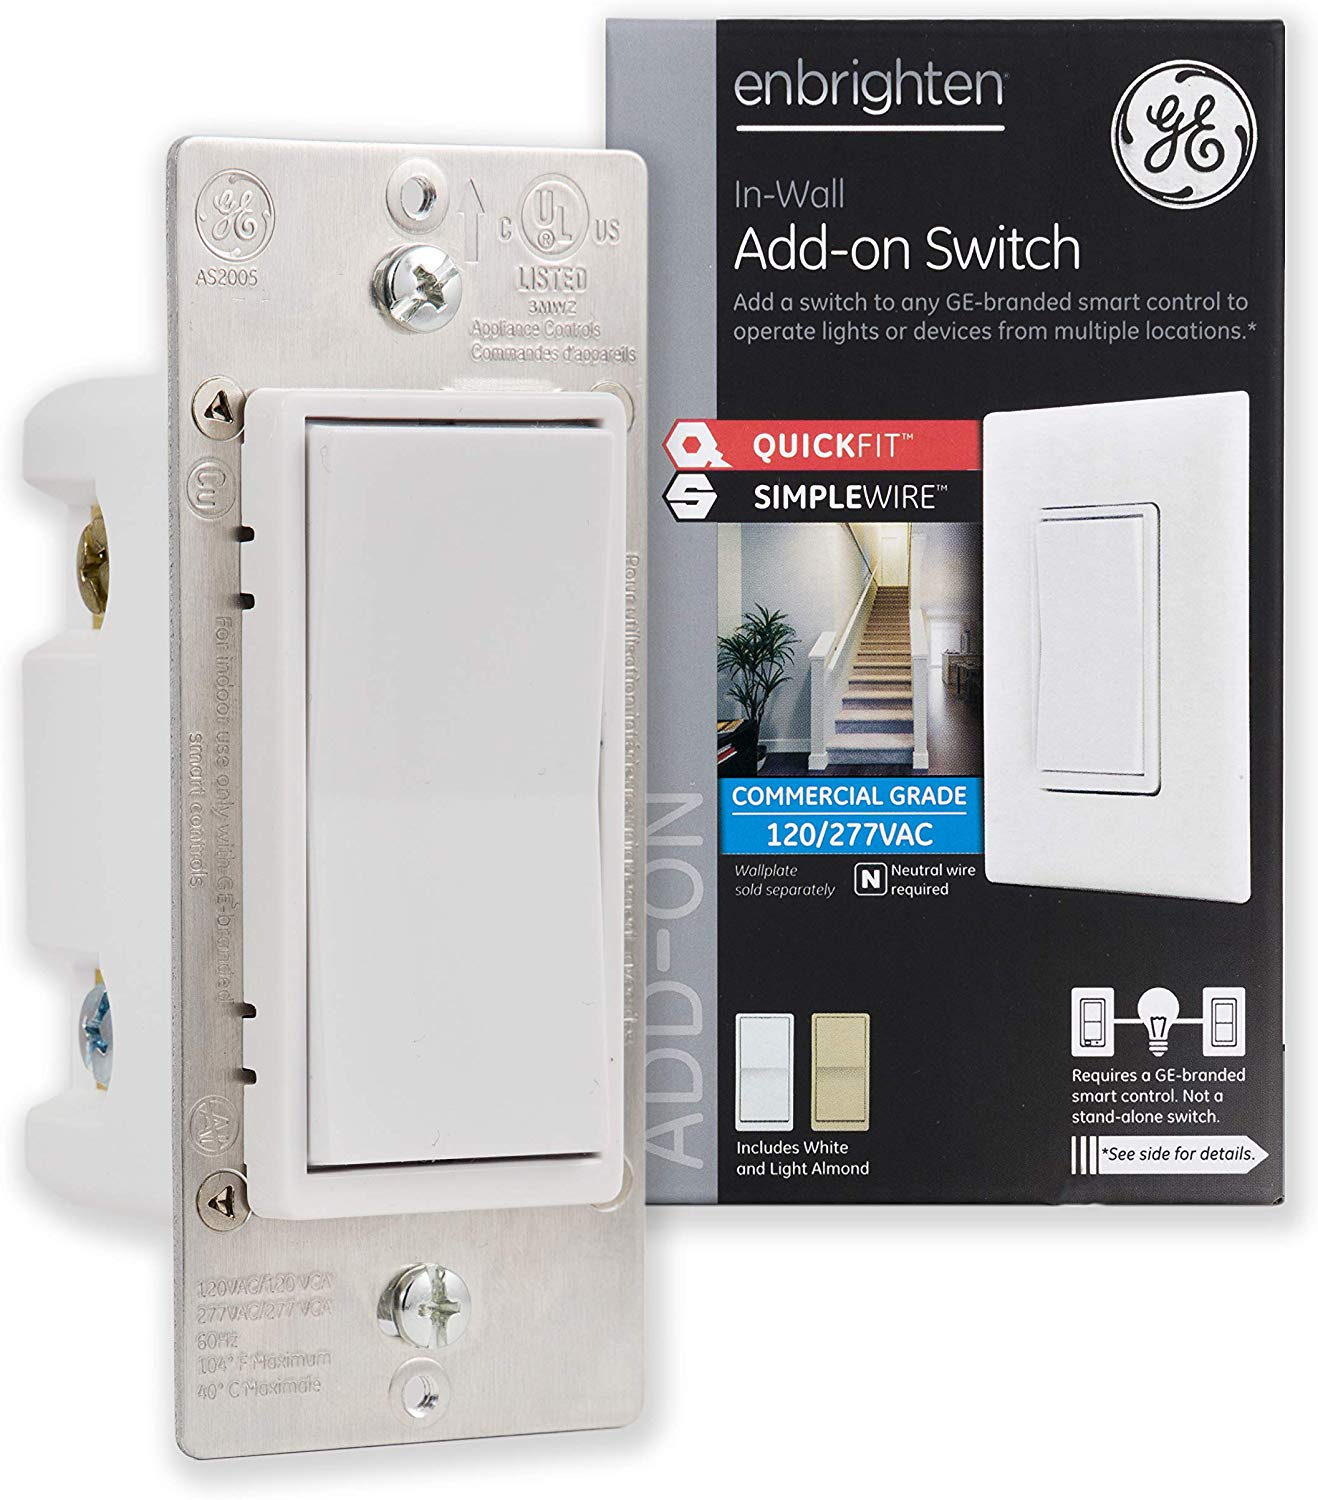 GE Enbrighten Add-On Switch With QuickFit And SimpleWire, Smart Lighting Control - 46199